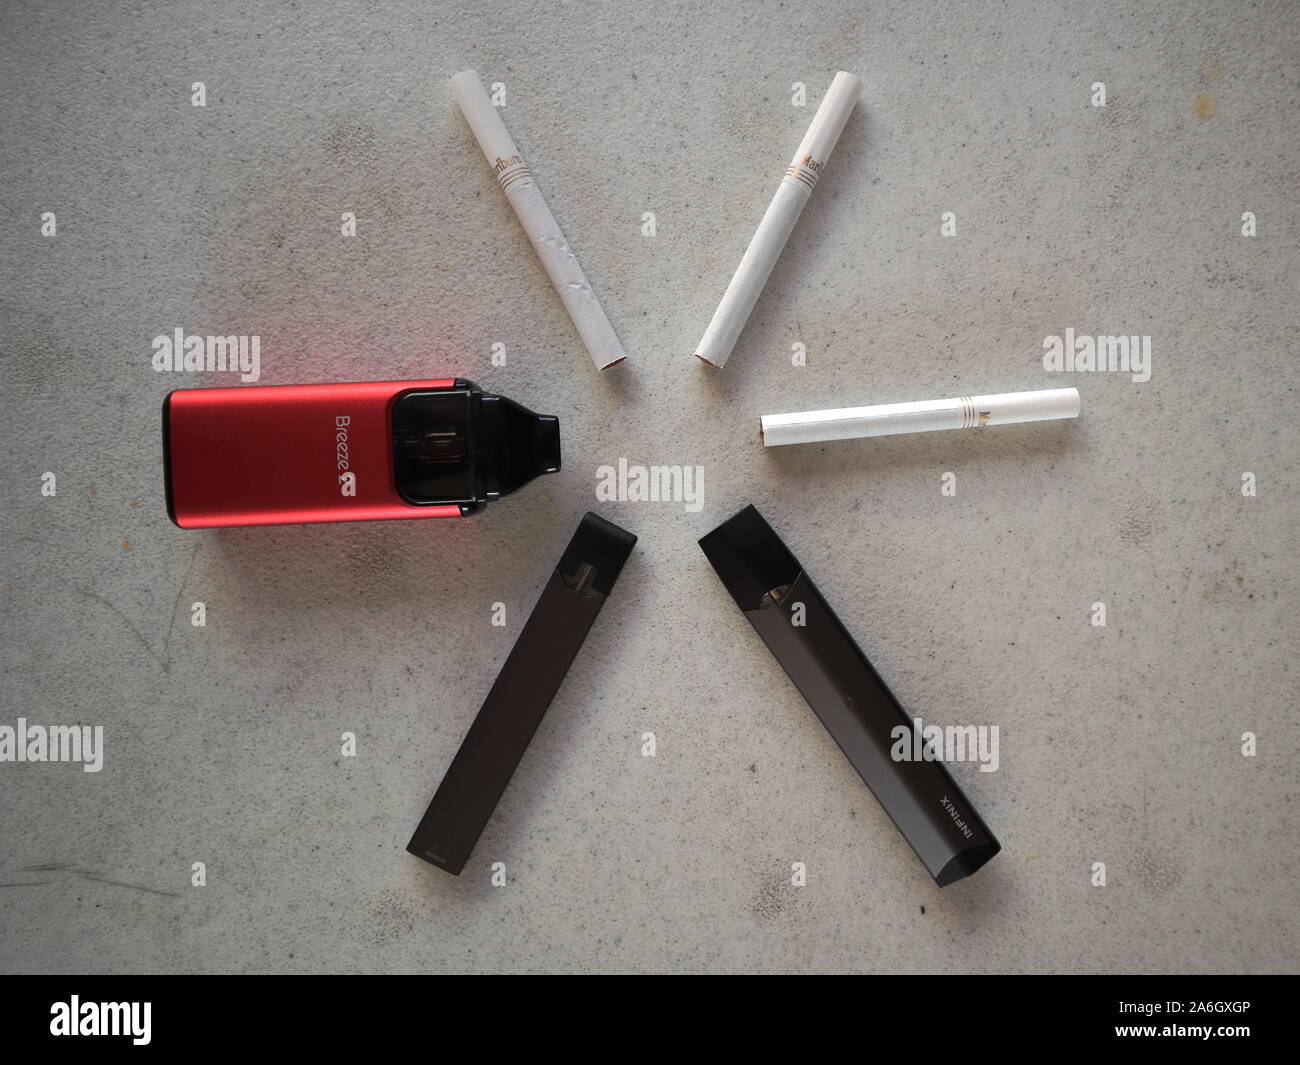 3 vape electronic cigarette juul, aspire breeze, smok inifinix devices and 3 marlboro gold light cigarettes in a star pattern on a white textured back Stock Photo